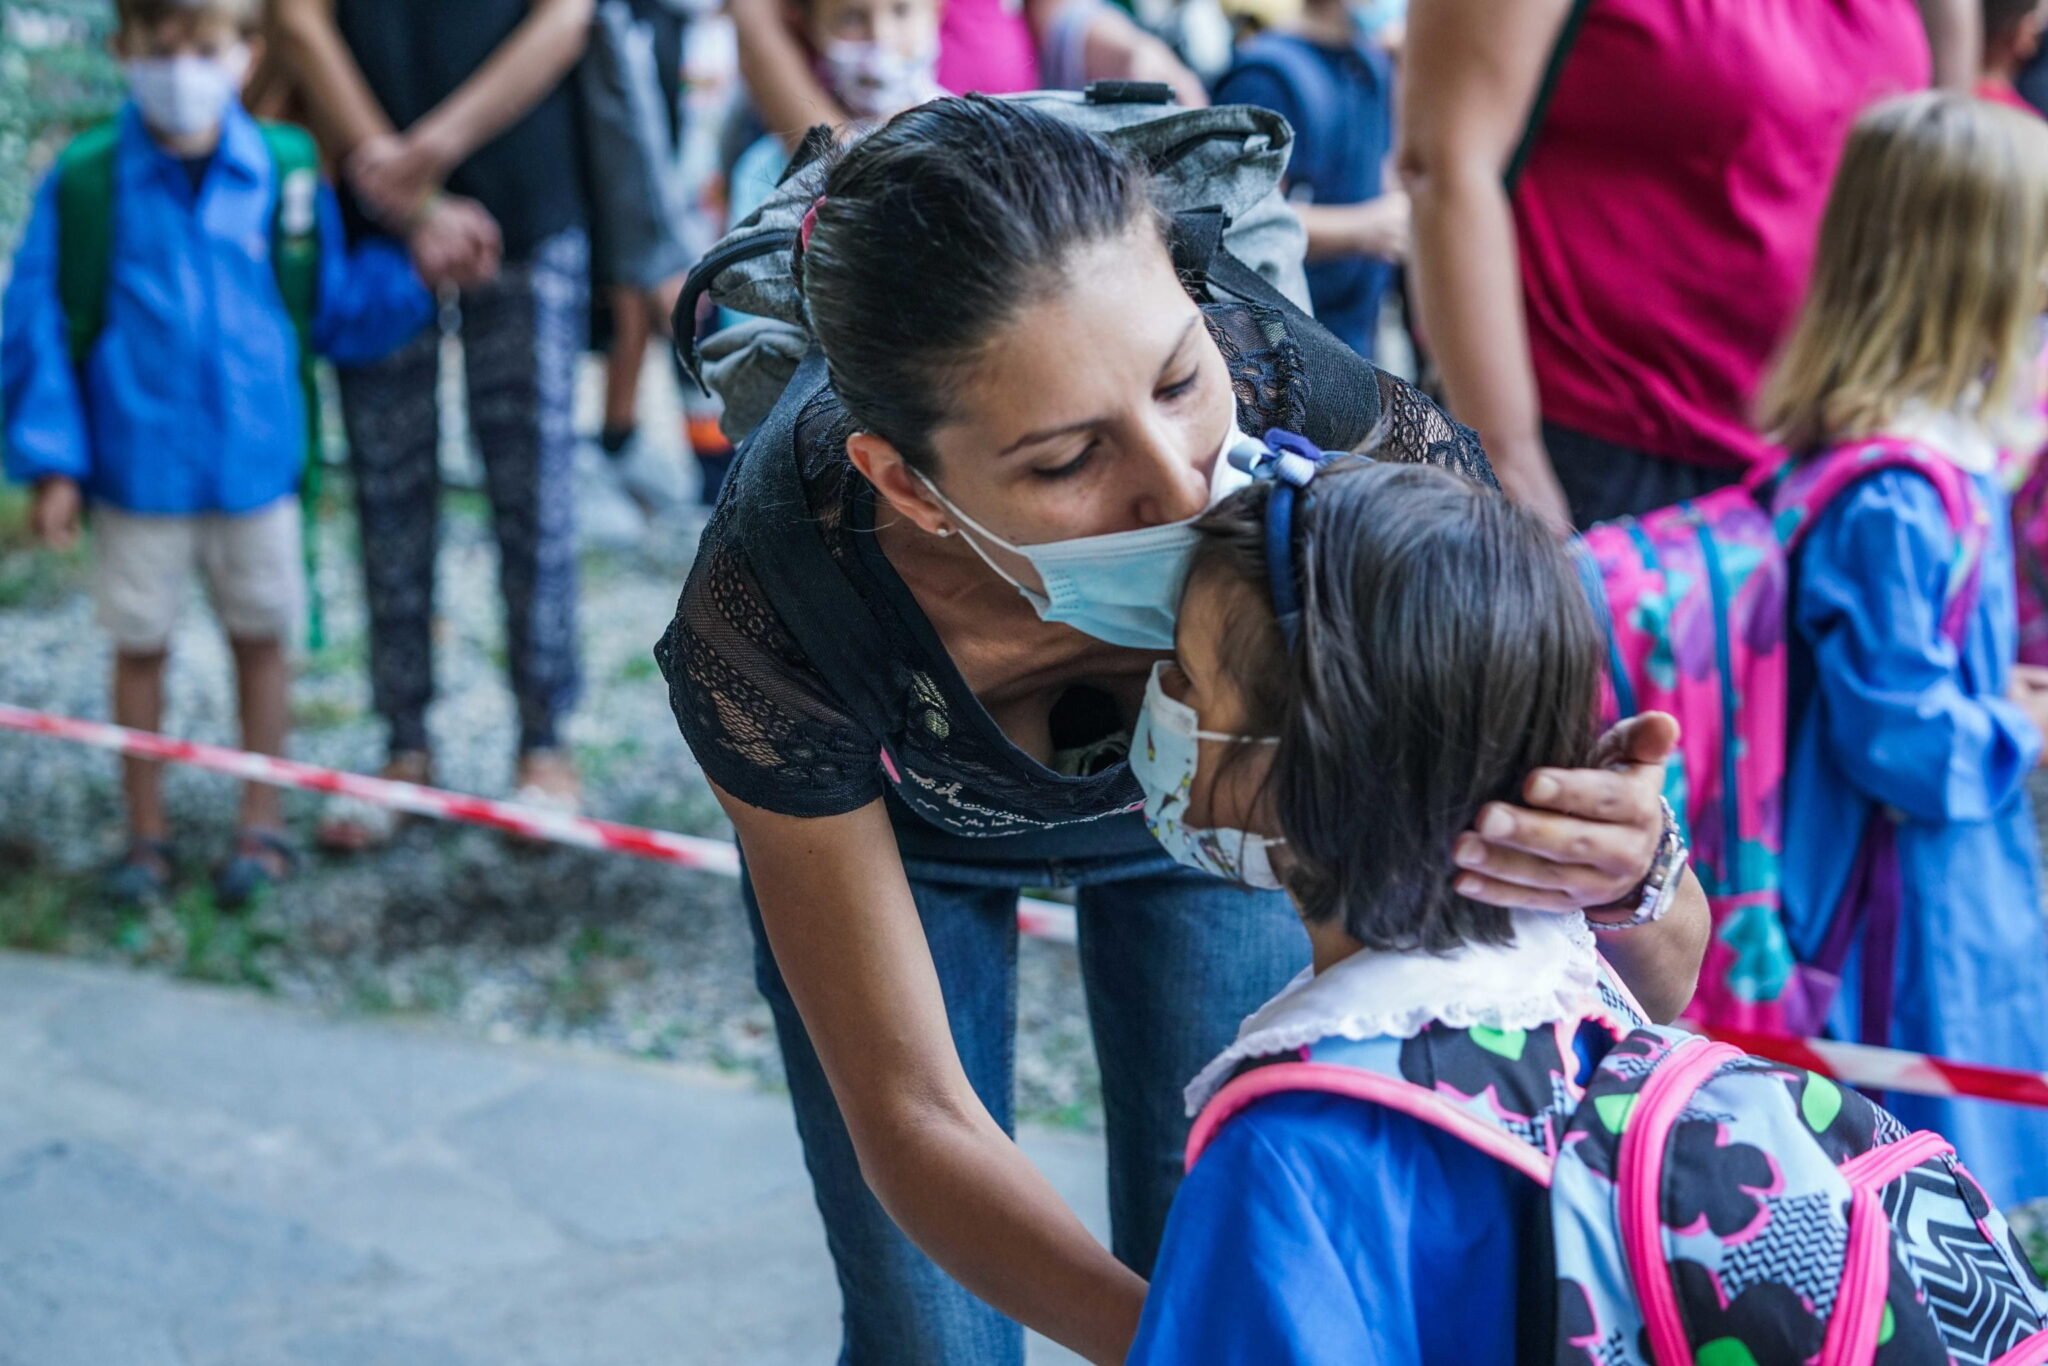 epa08667679 A mother greets her daugther at Baricco primary school in Turin, Italy, 14 September 2020. Schools reopened in much of Italy on 14 September after being closed for six months amid the coronavirus pandemic. Some 5.6 million students were expected to be back to school.  EPA/TINO ROMANO 
Dostawca: PAP/EPA.